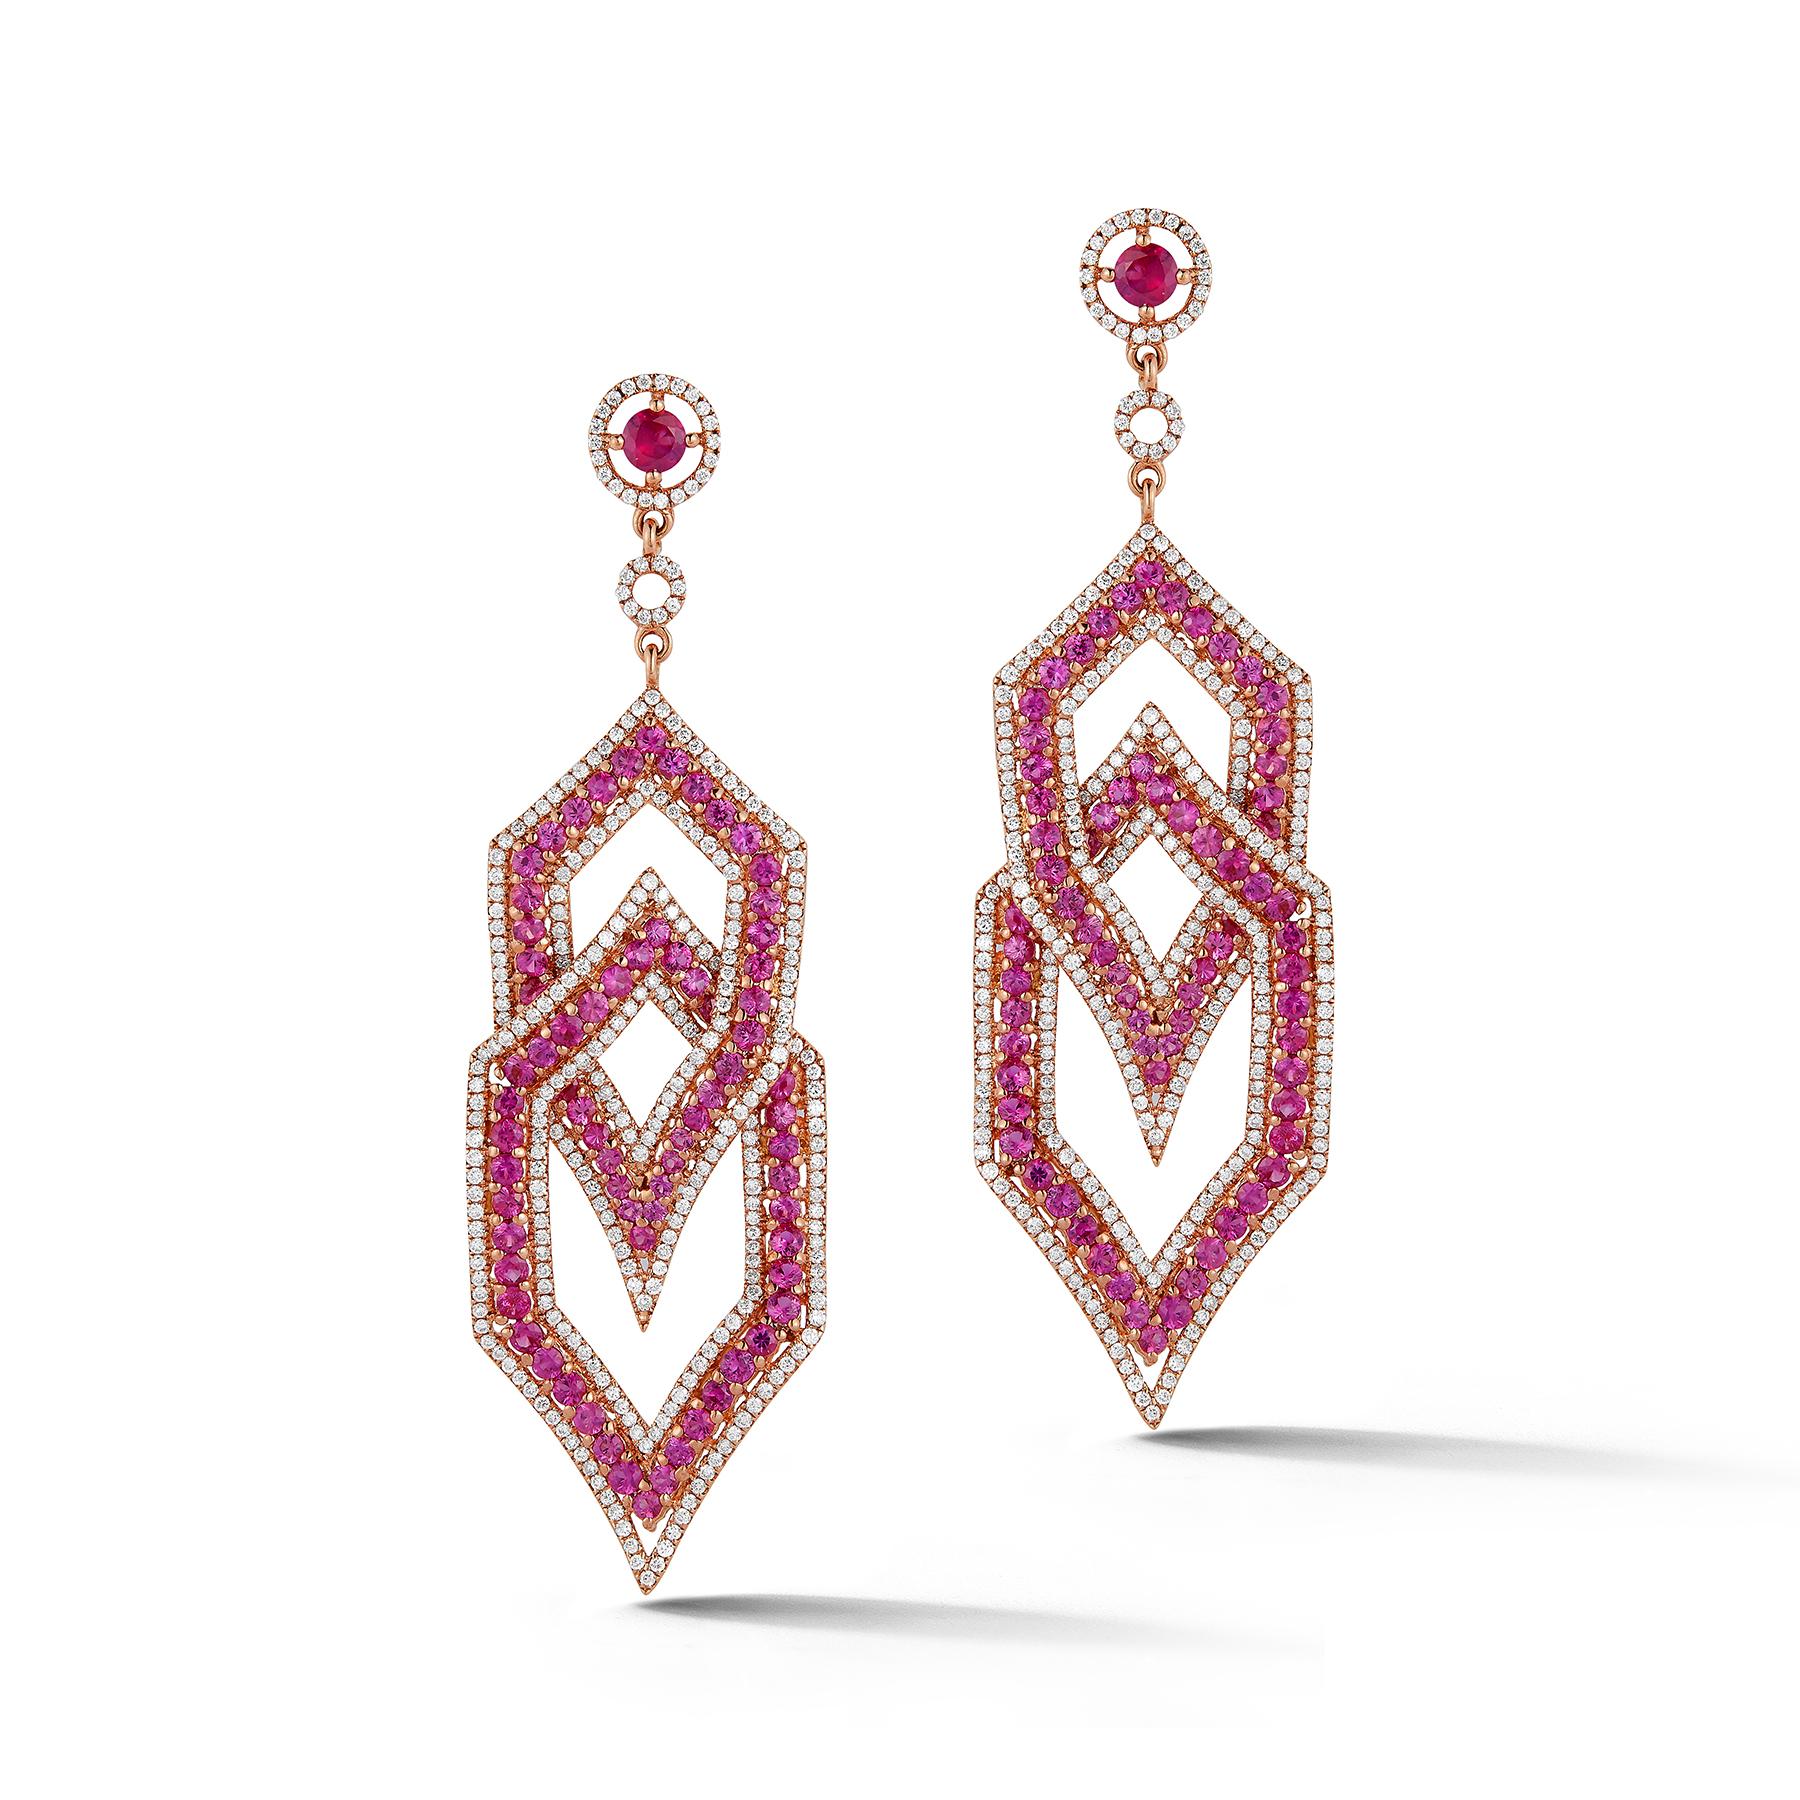 Beautiful, eye-catching 18K Yellow Gold Dangling Hexagon-type shaped Earrings with 2 Rubies, total weight .76 Cts., 144 Red Sapphires, total weight 5.04 Cts., & 556 diamonds, total weight 2.88 Cts.